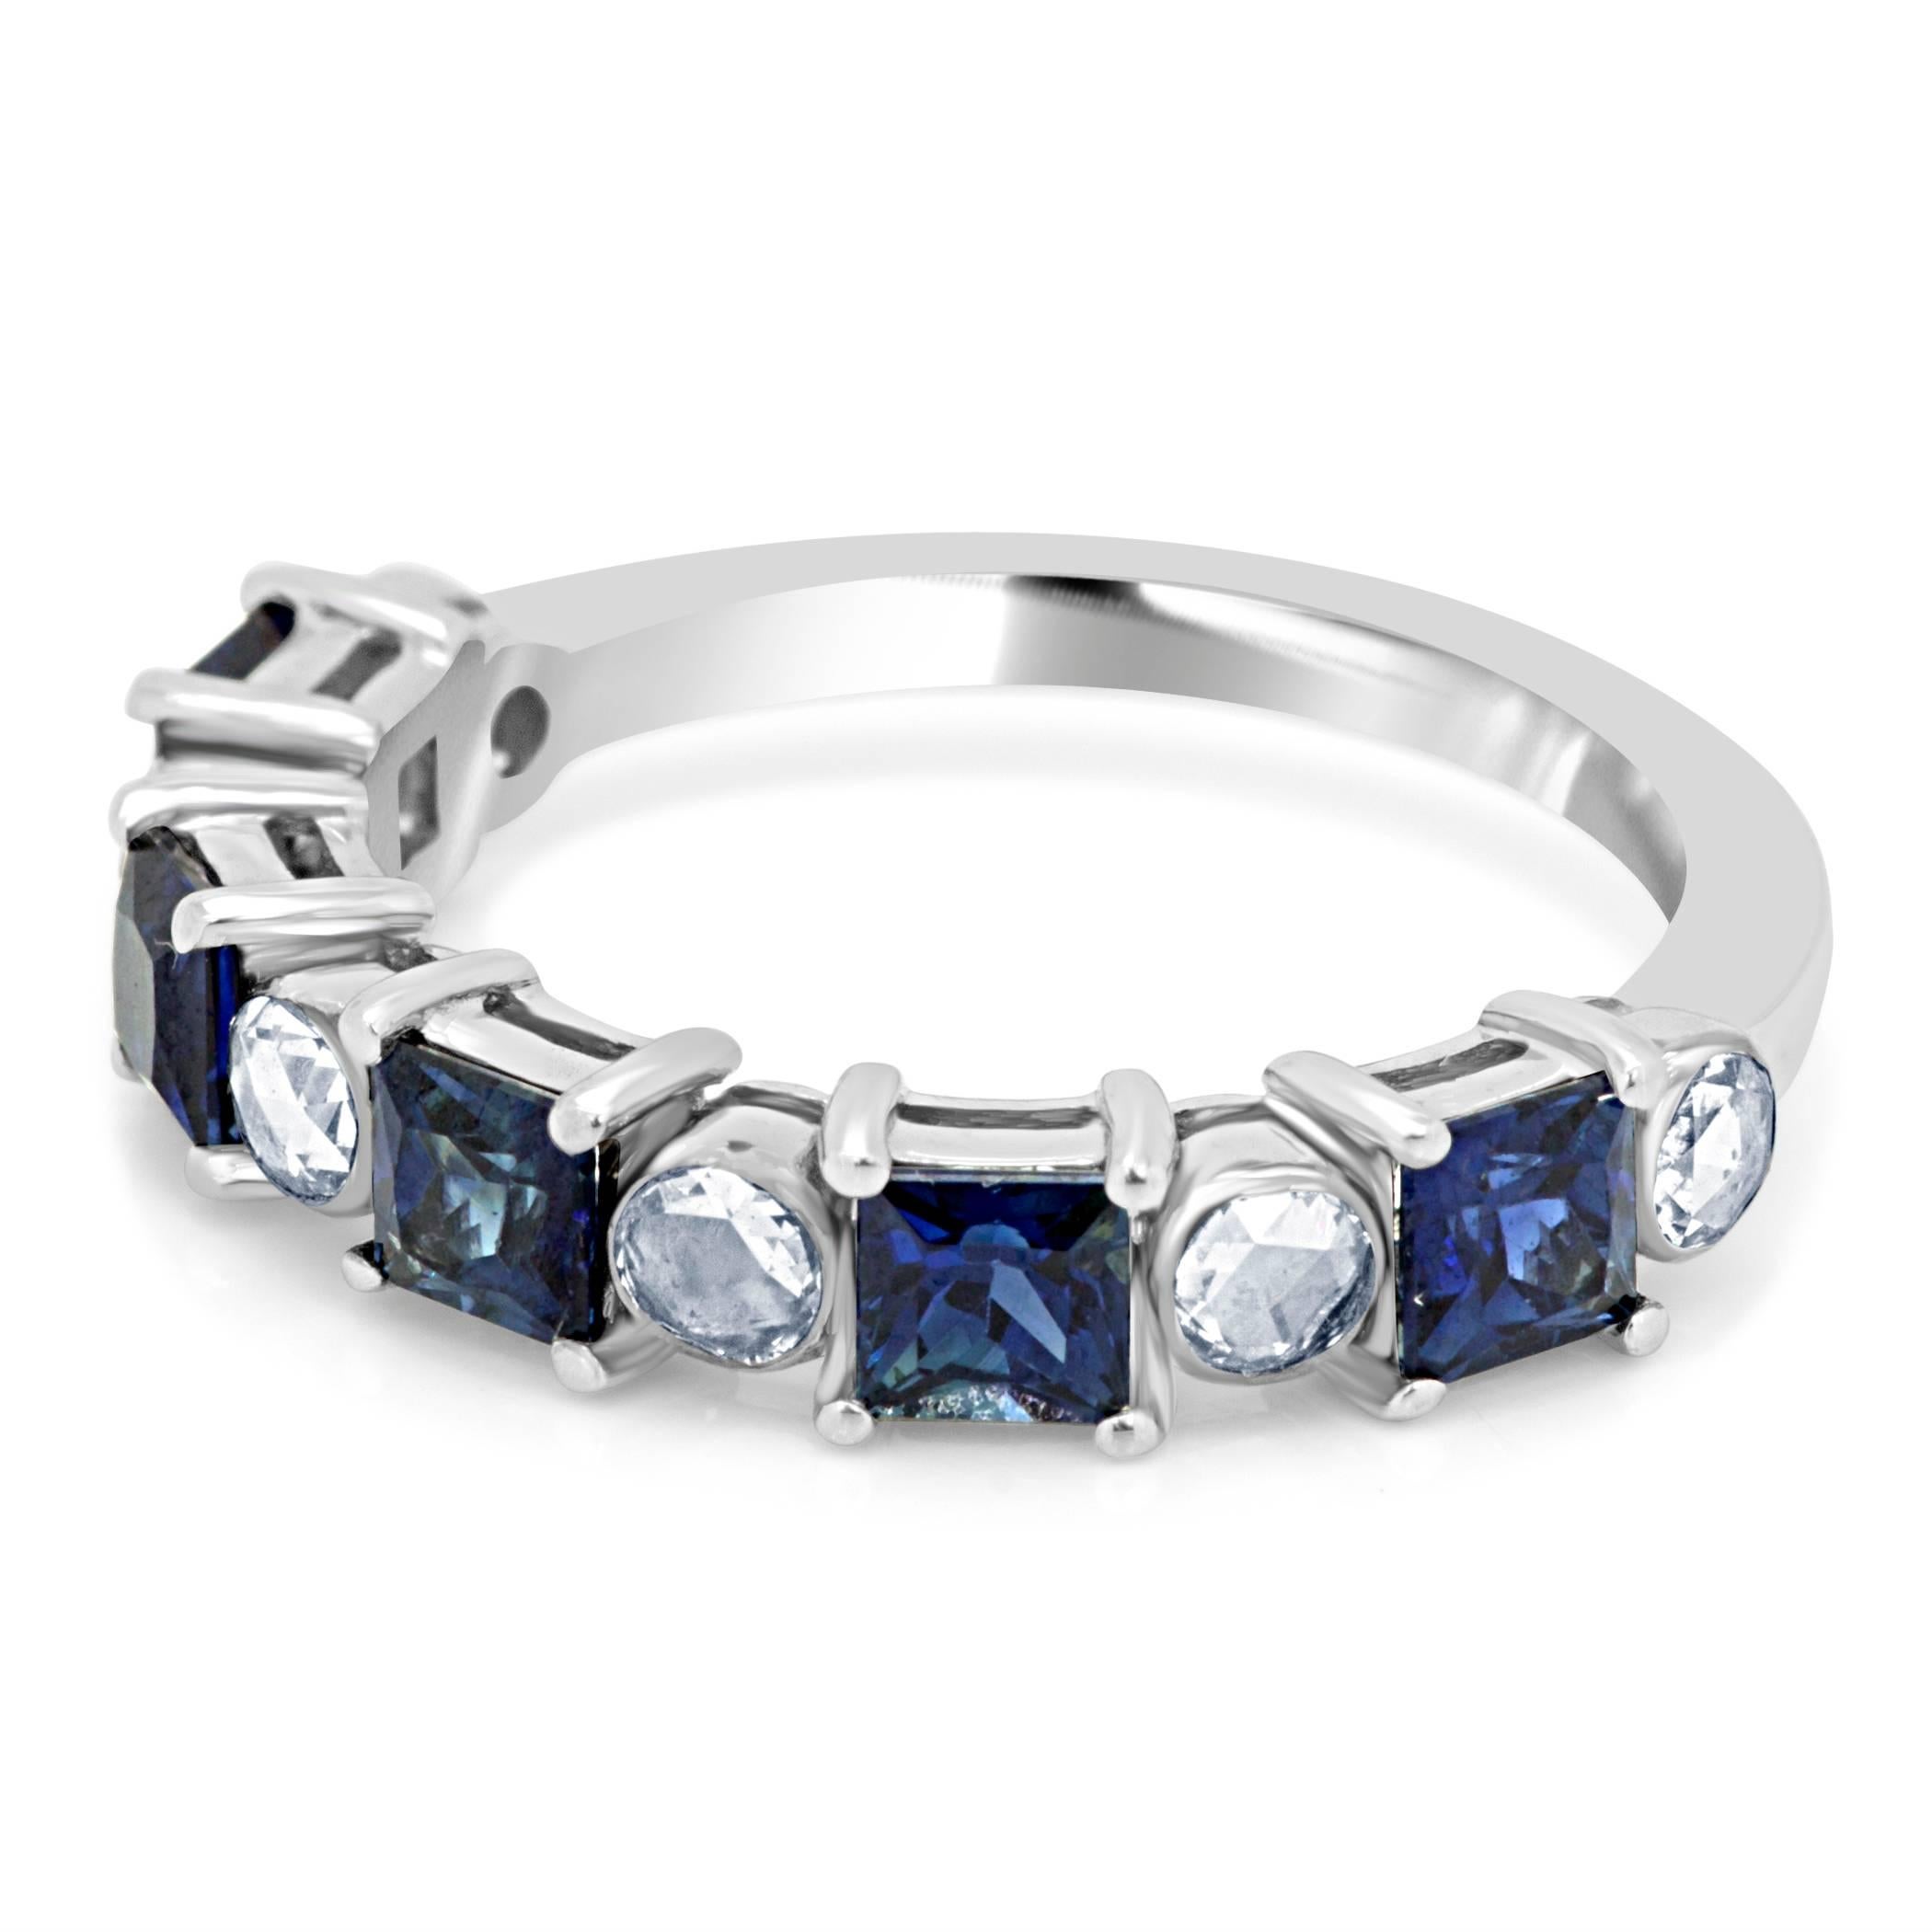 Blue Sapphire Princess cut 1.47 Carat with White Rosecut Diamond on each side 0.32 Carat in 14K White Gold Cocktail Band Ring.

MADE IN USA.
Total Stone Weight 1.79 Carat